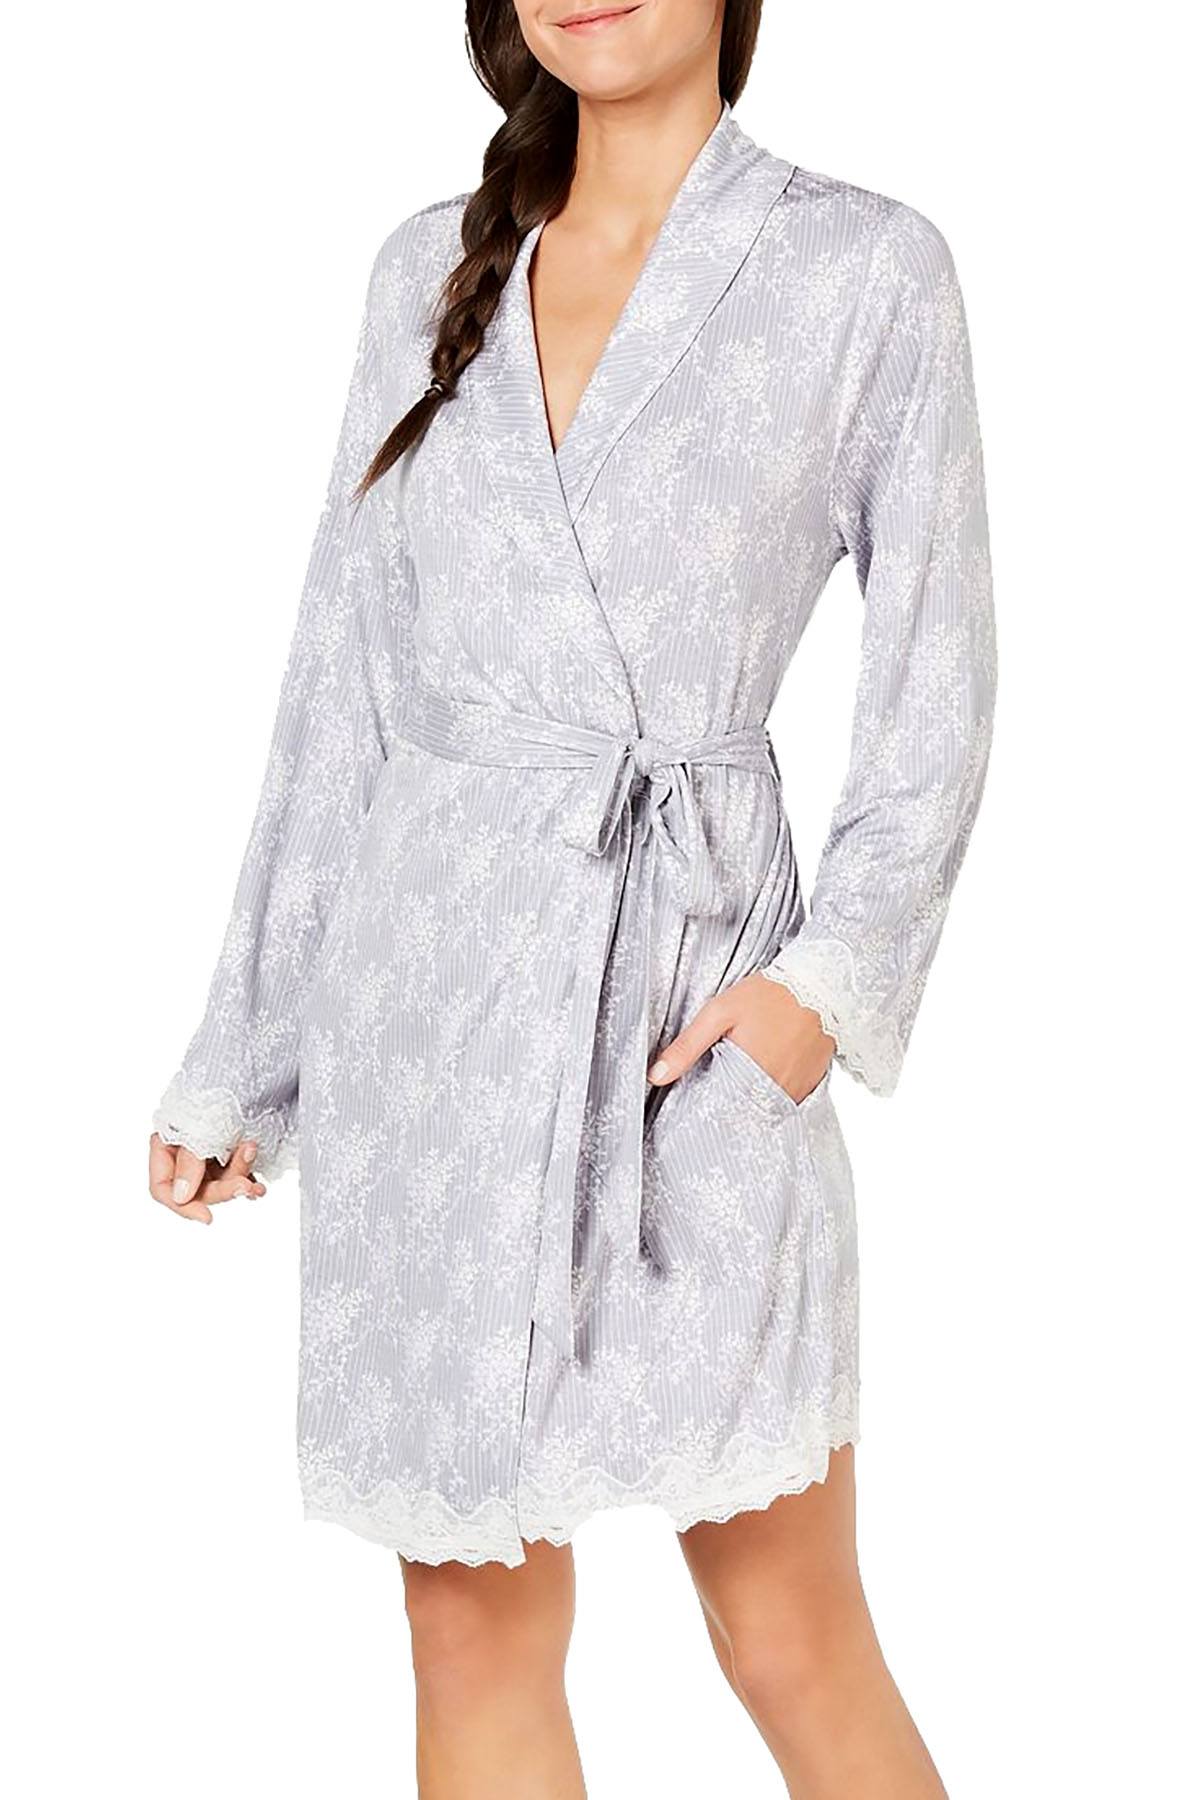 Charter Club Lace Trimmed Soft Knit Modal Wrap Robe in Floral Spray